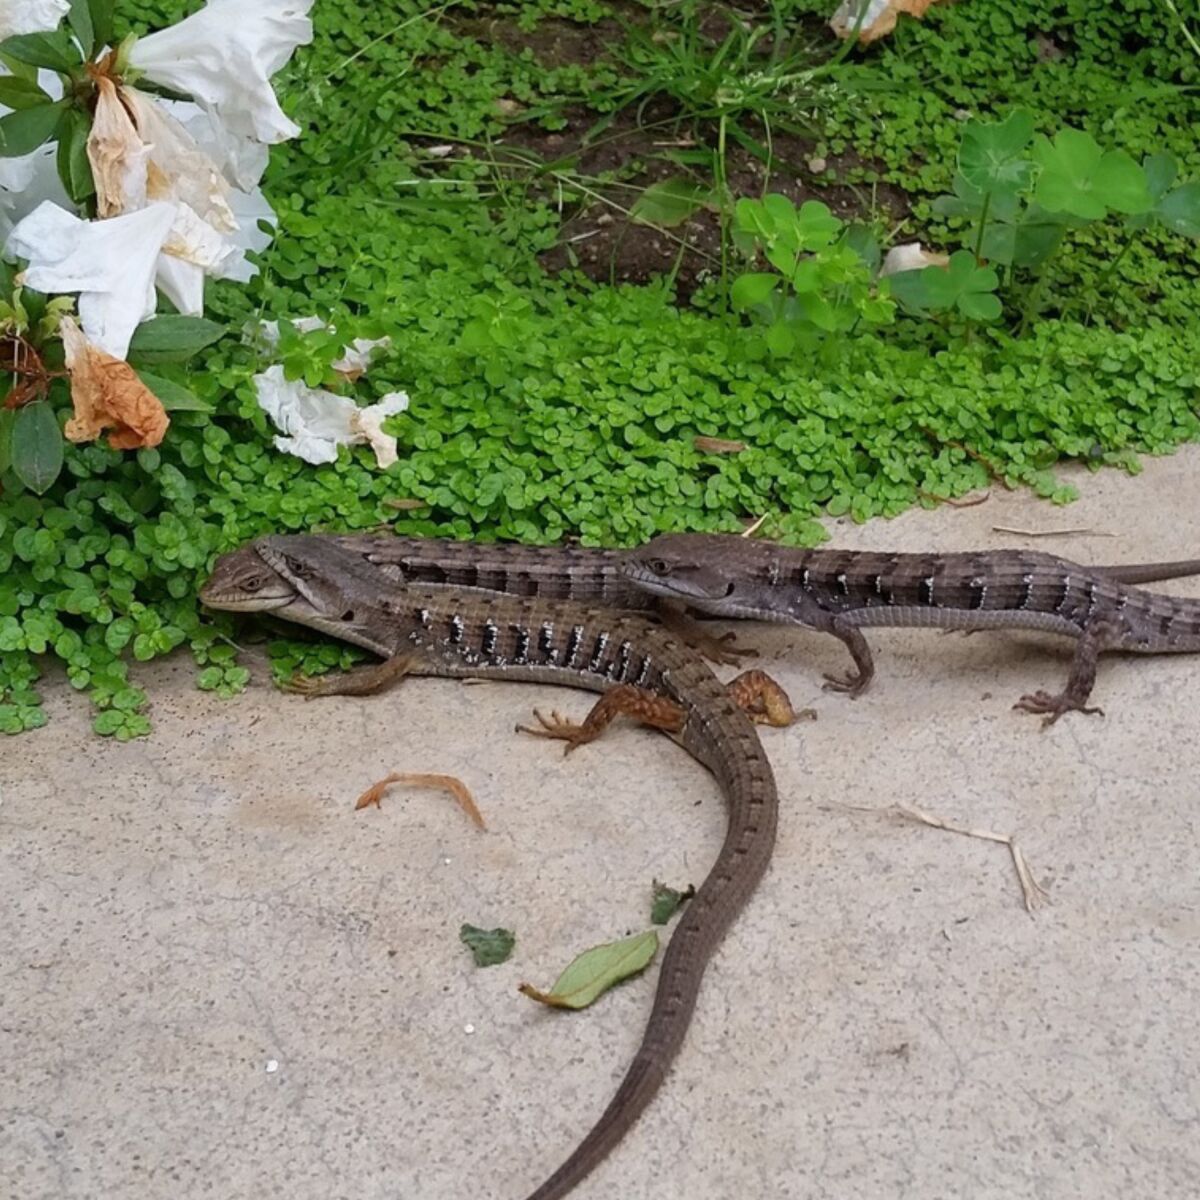 Three lizards on a sidewalk, one gripping the head of another in its jaws.